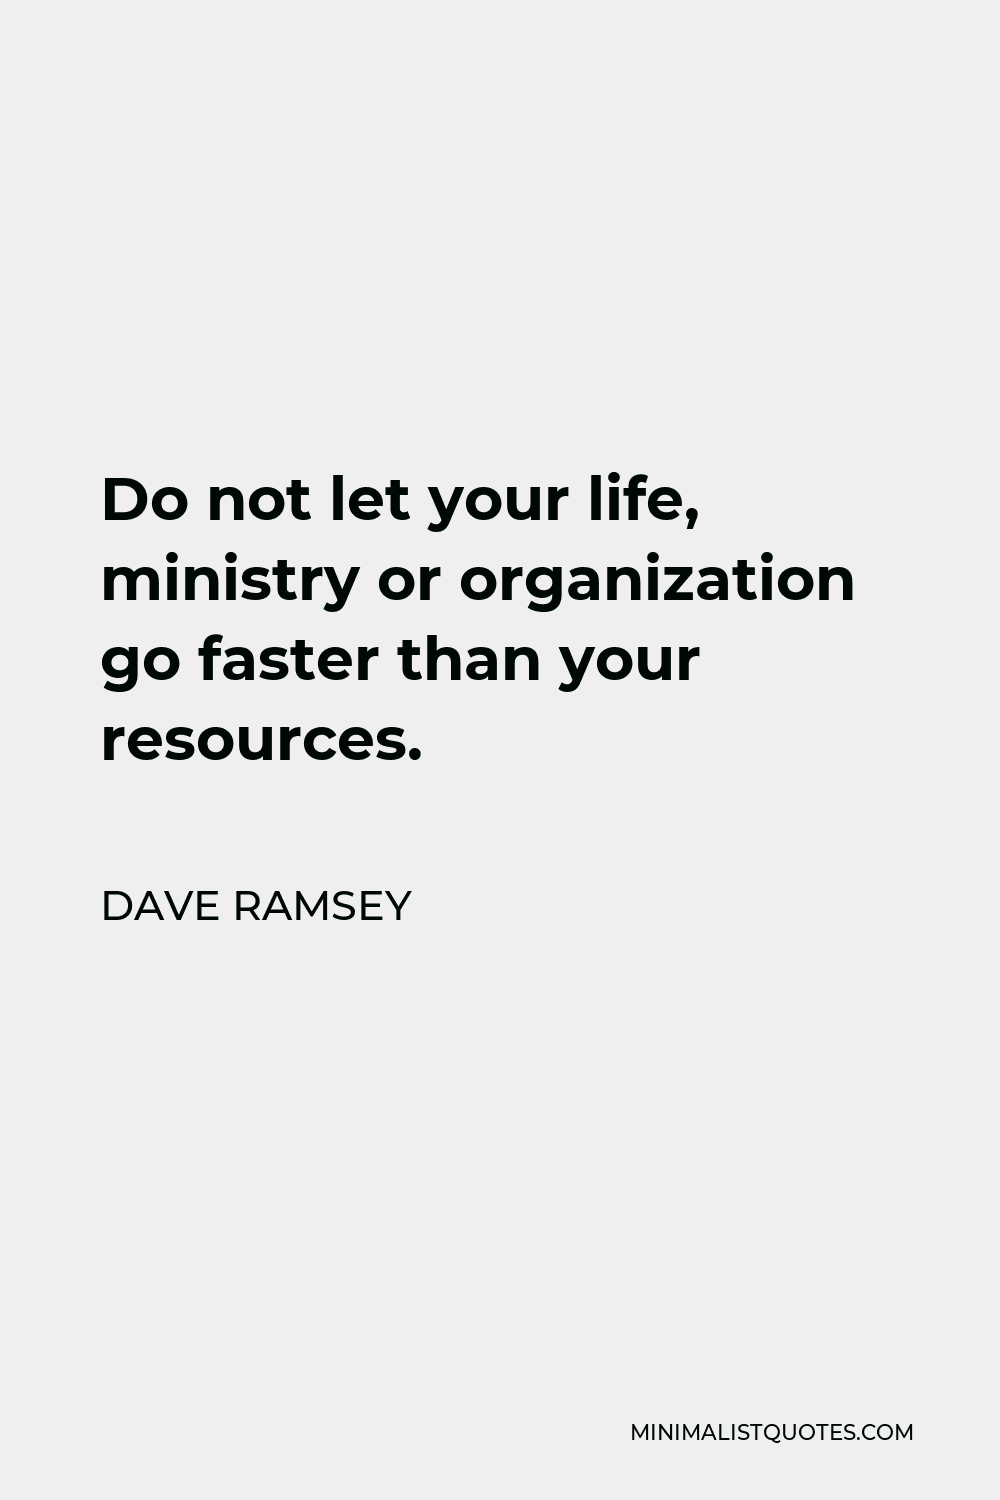 Dave Ramsey Quote - Do not let your life, ministry or organization go faster than your resources.